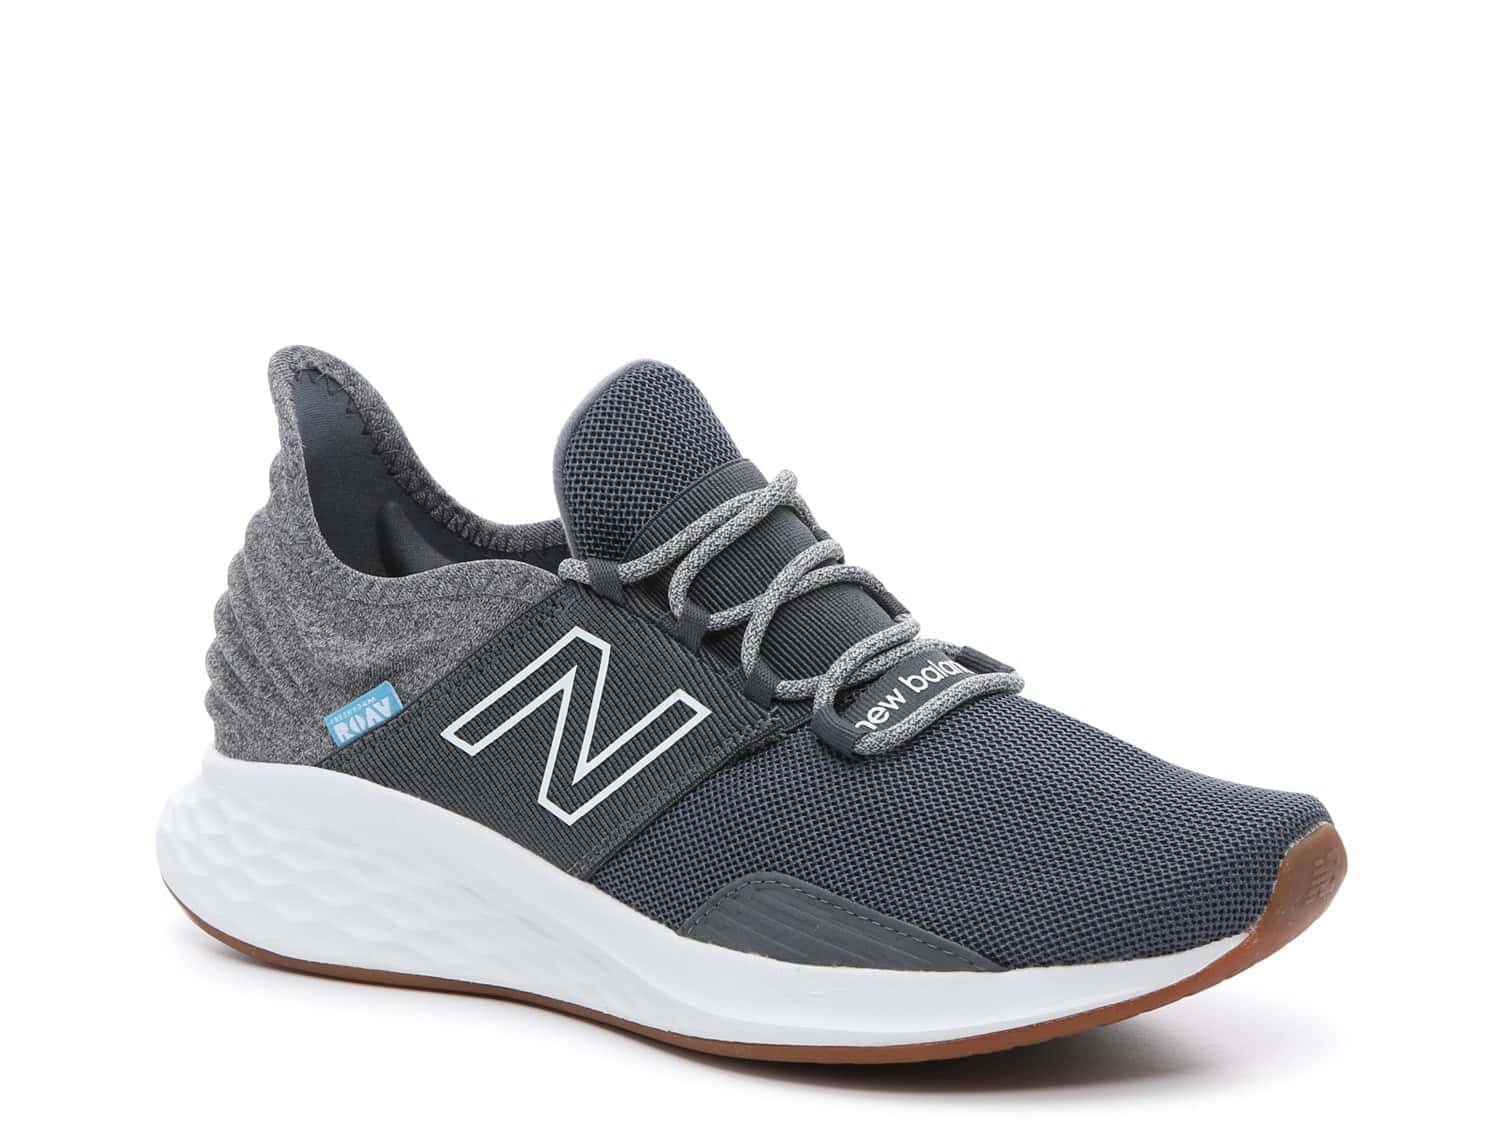 Sleek design and comfort in every step with New Balance